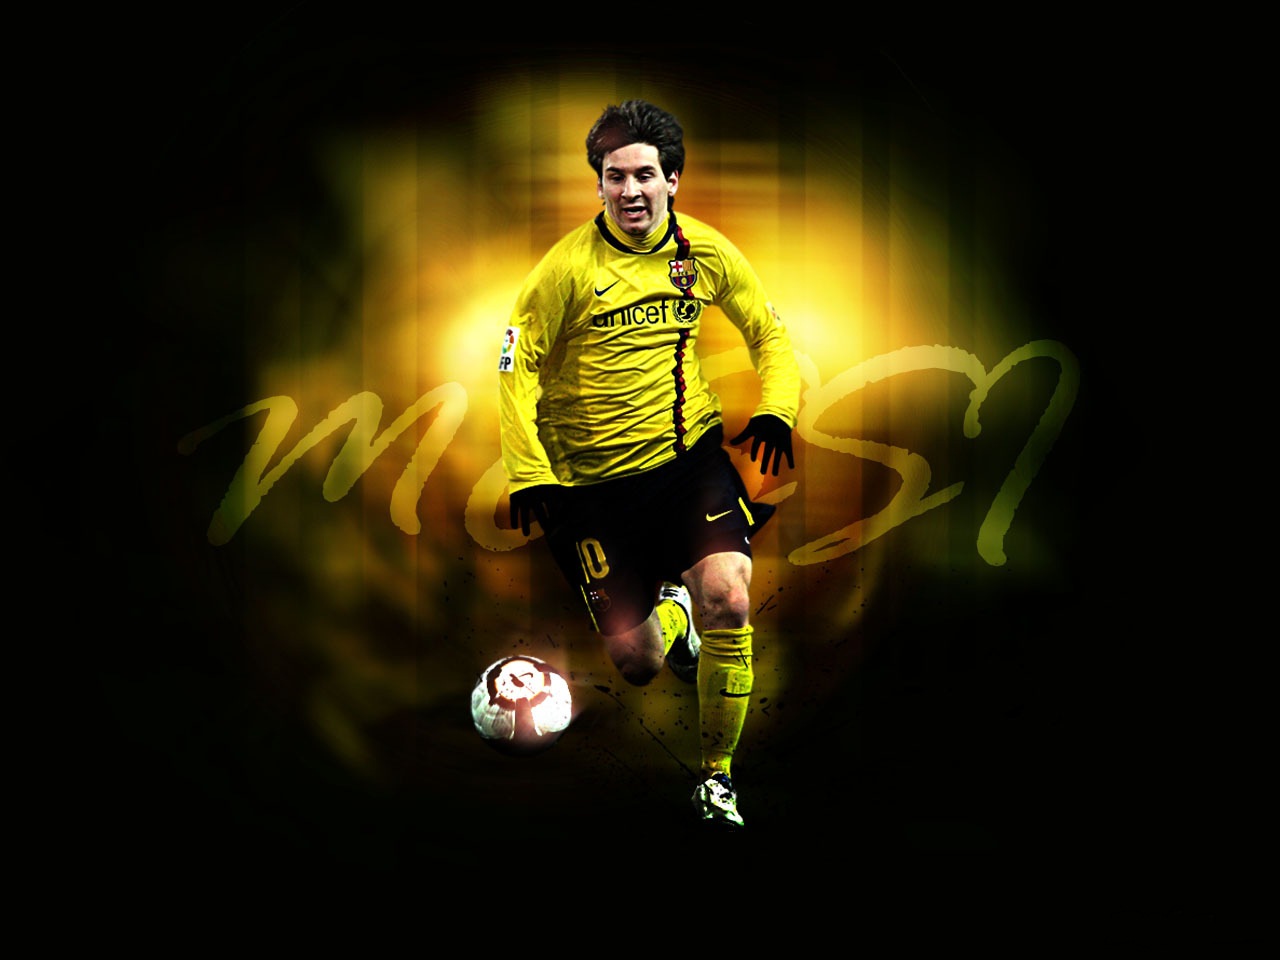 All Wallpapers Lionel Messi hd New Nice Wallpapers 2013